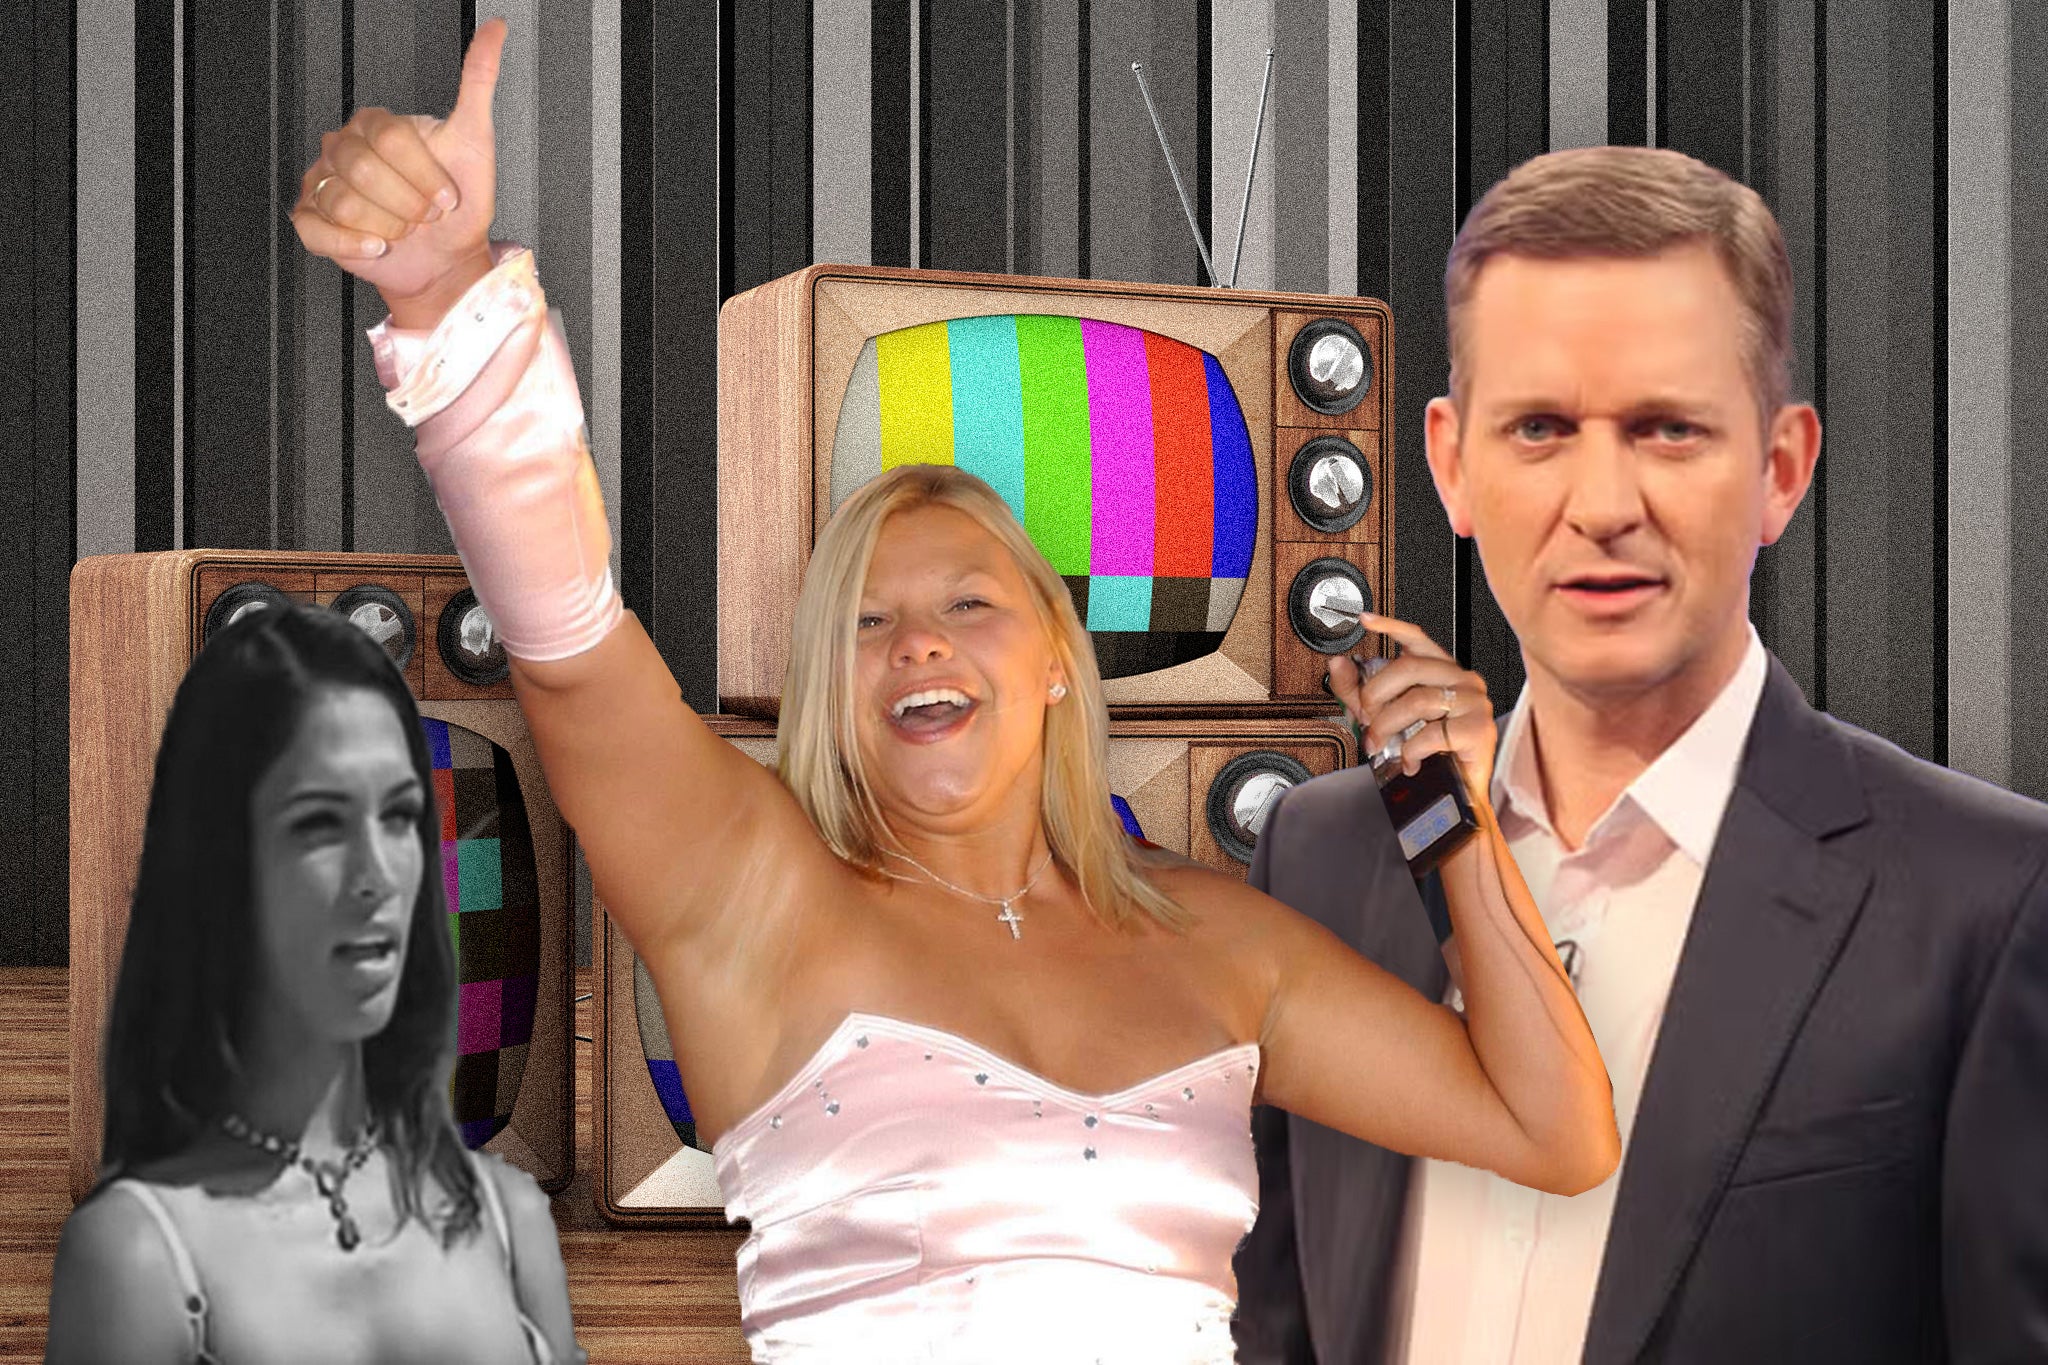 From ‘There’s Something About Miriam’ to ‘Big Brother’ and ‘The Jeremy Kyle Show’, TV has exploited people for years